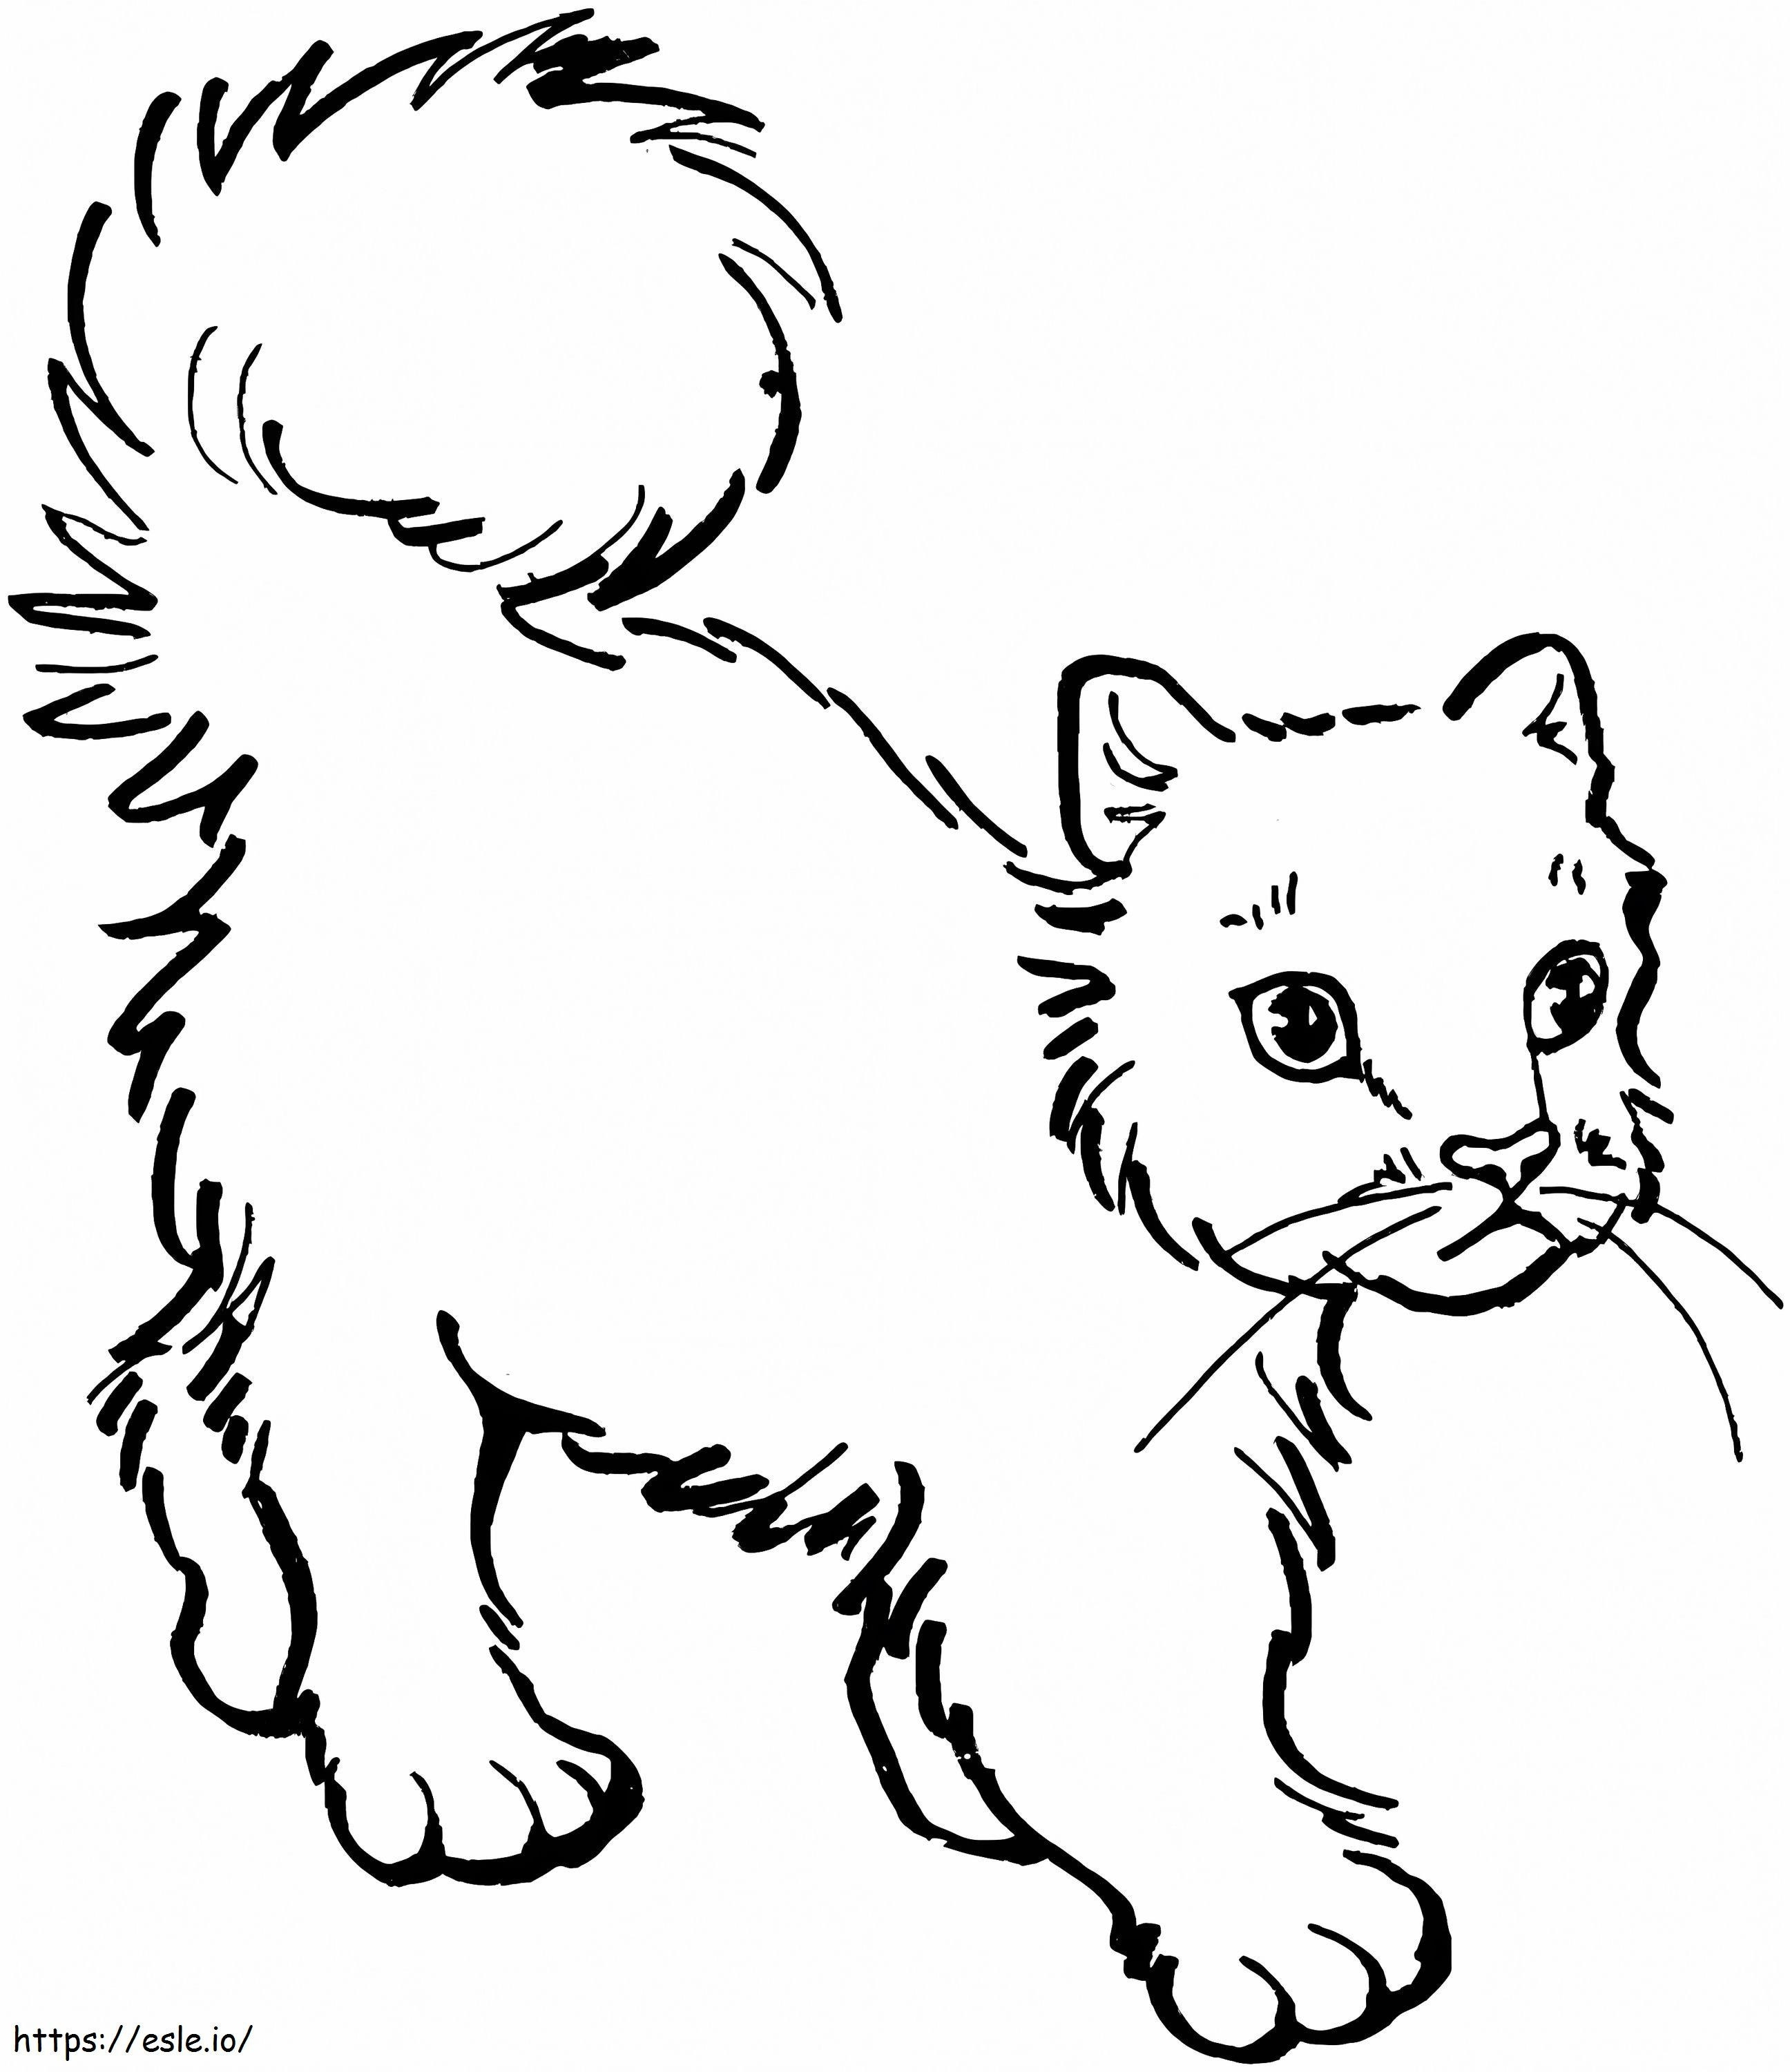 Walking Cat coloring page